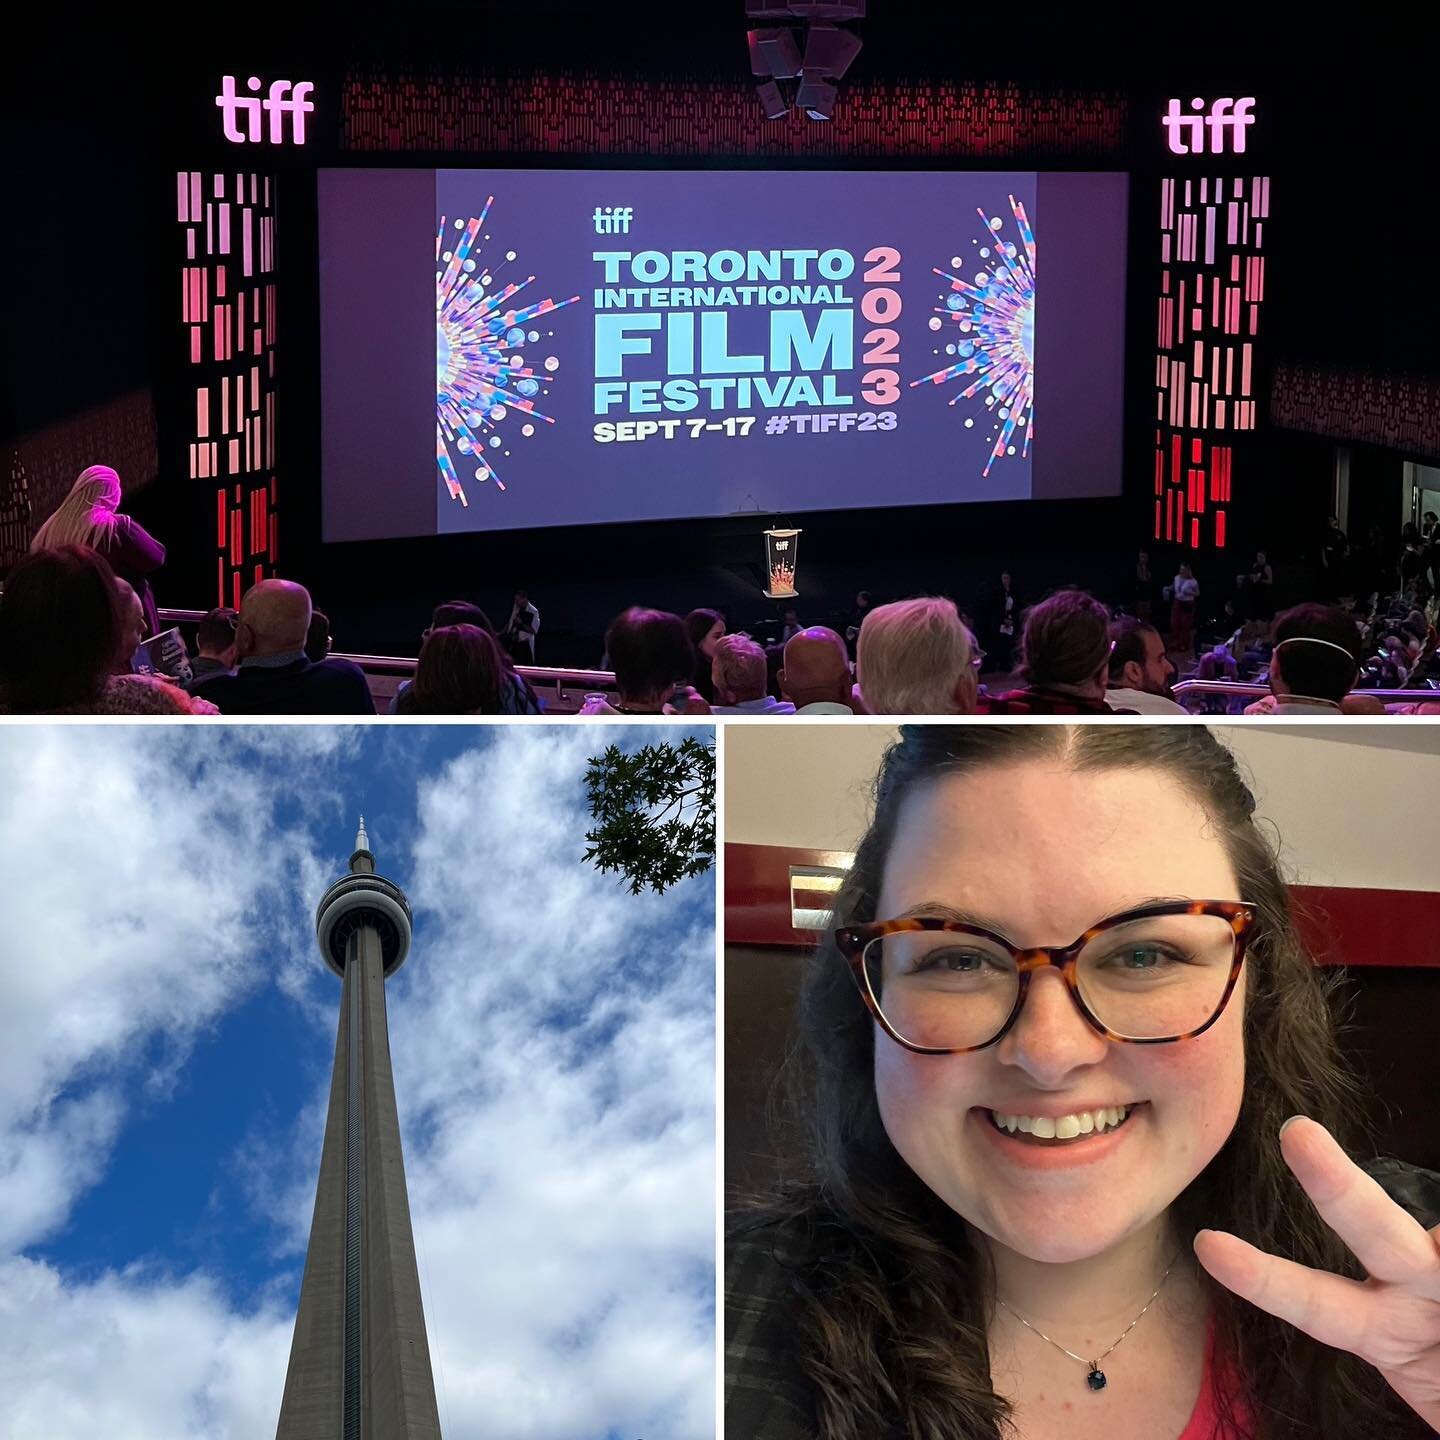 Another big thank you to TIFF and the TIFF Press Office for access to this amazing festival once again.
&bull;
Also, special thanks to Netflix for the ticket to the premiere of Fair Play and giving me a reason to get all dressed up for my last night 